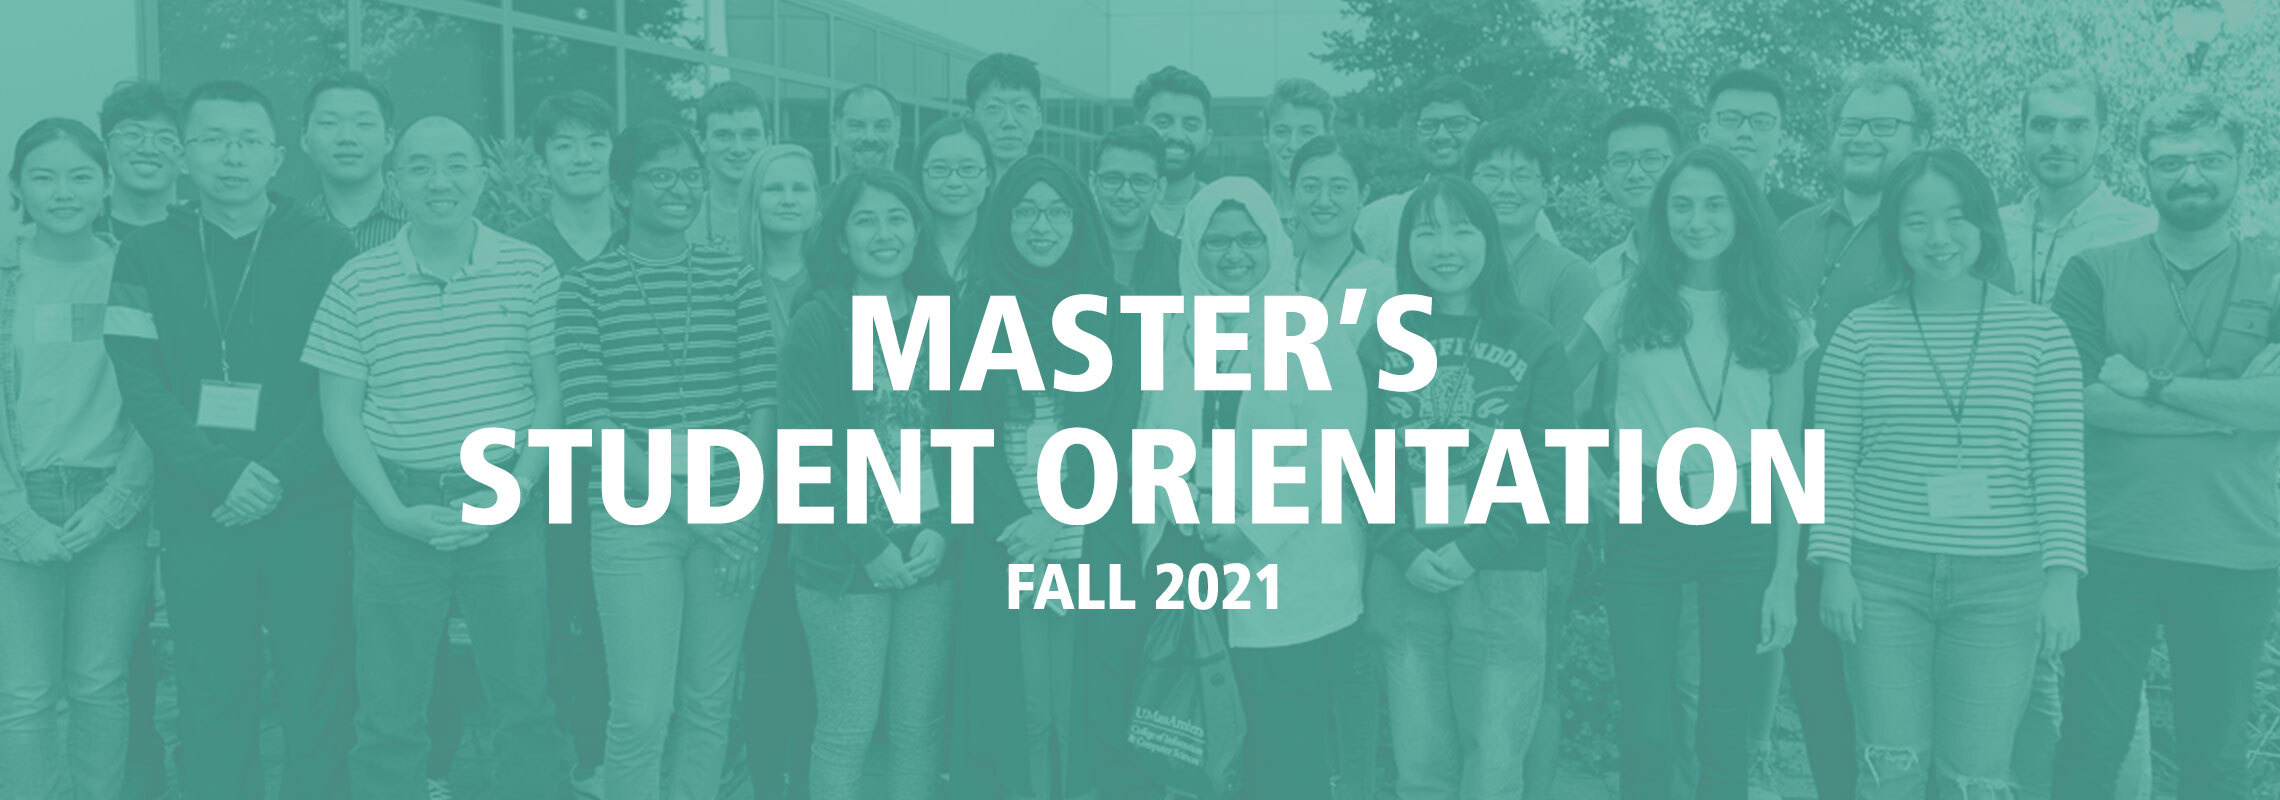 Master's Student Orientation Fall 2021